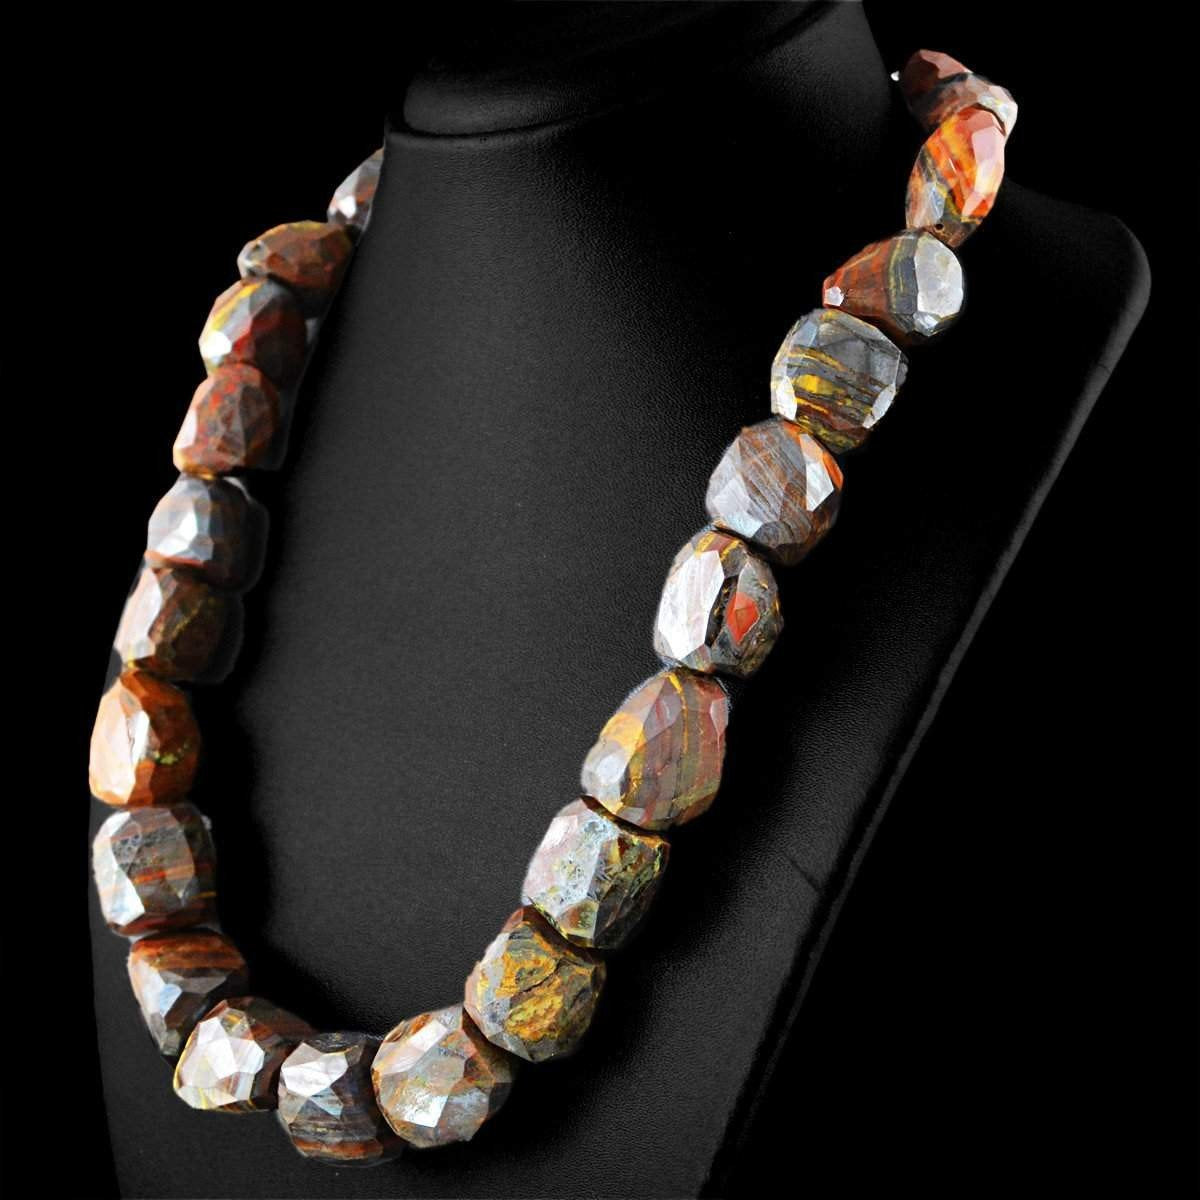 gemsmore:Natural Red Power Tiger Eye Necklace Unheated Beads